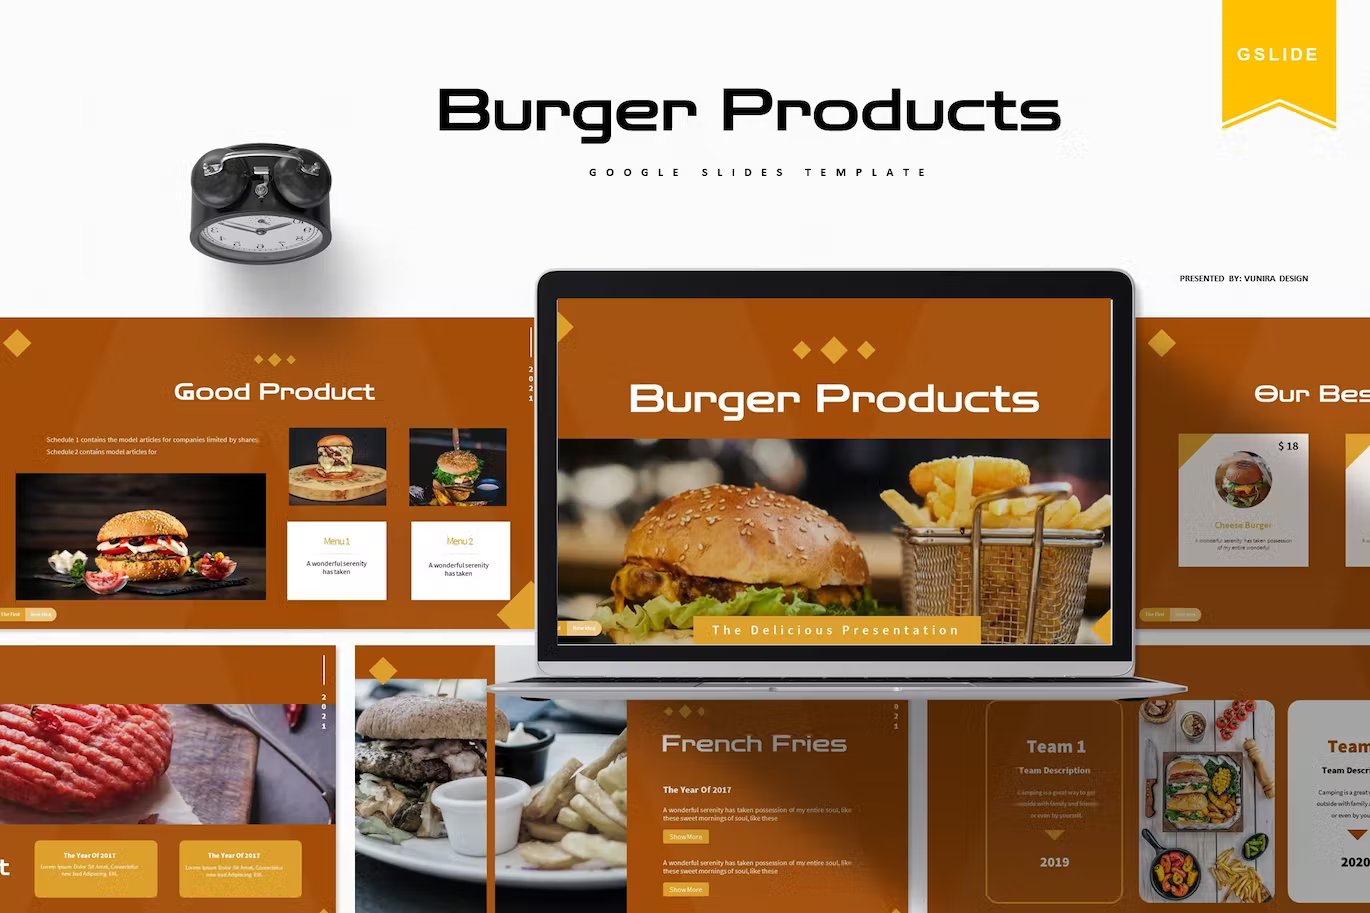 Black lettering "Burger Products Google Slides Template" and different presentation templates on a white background.